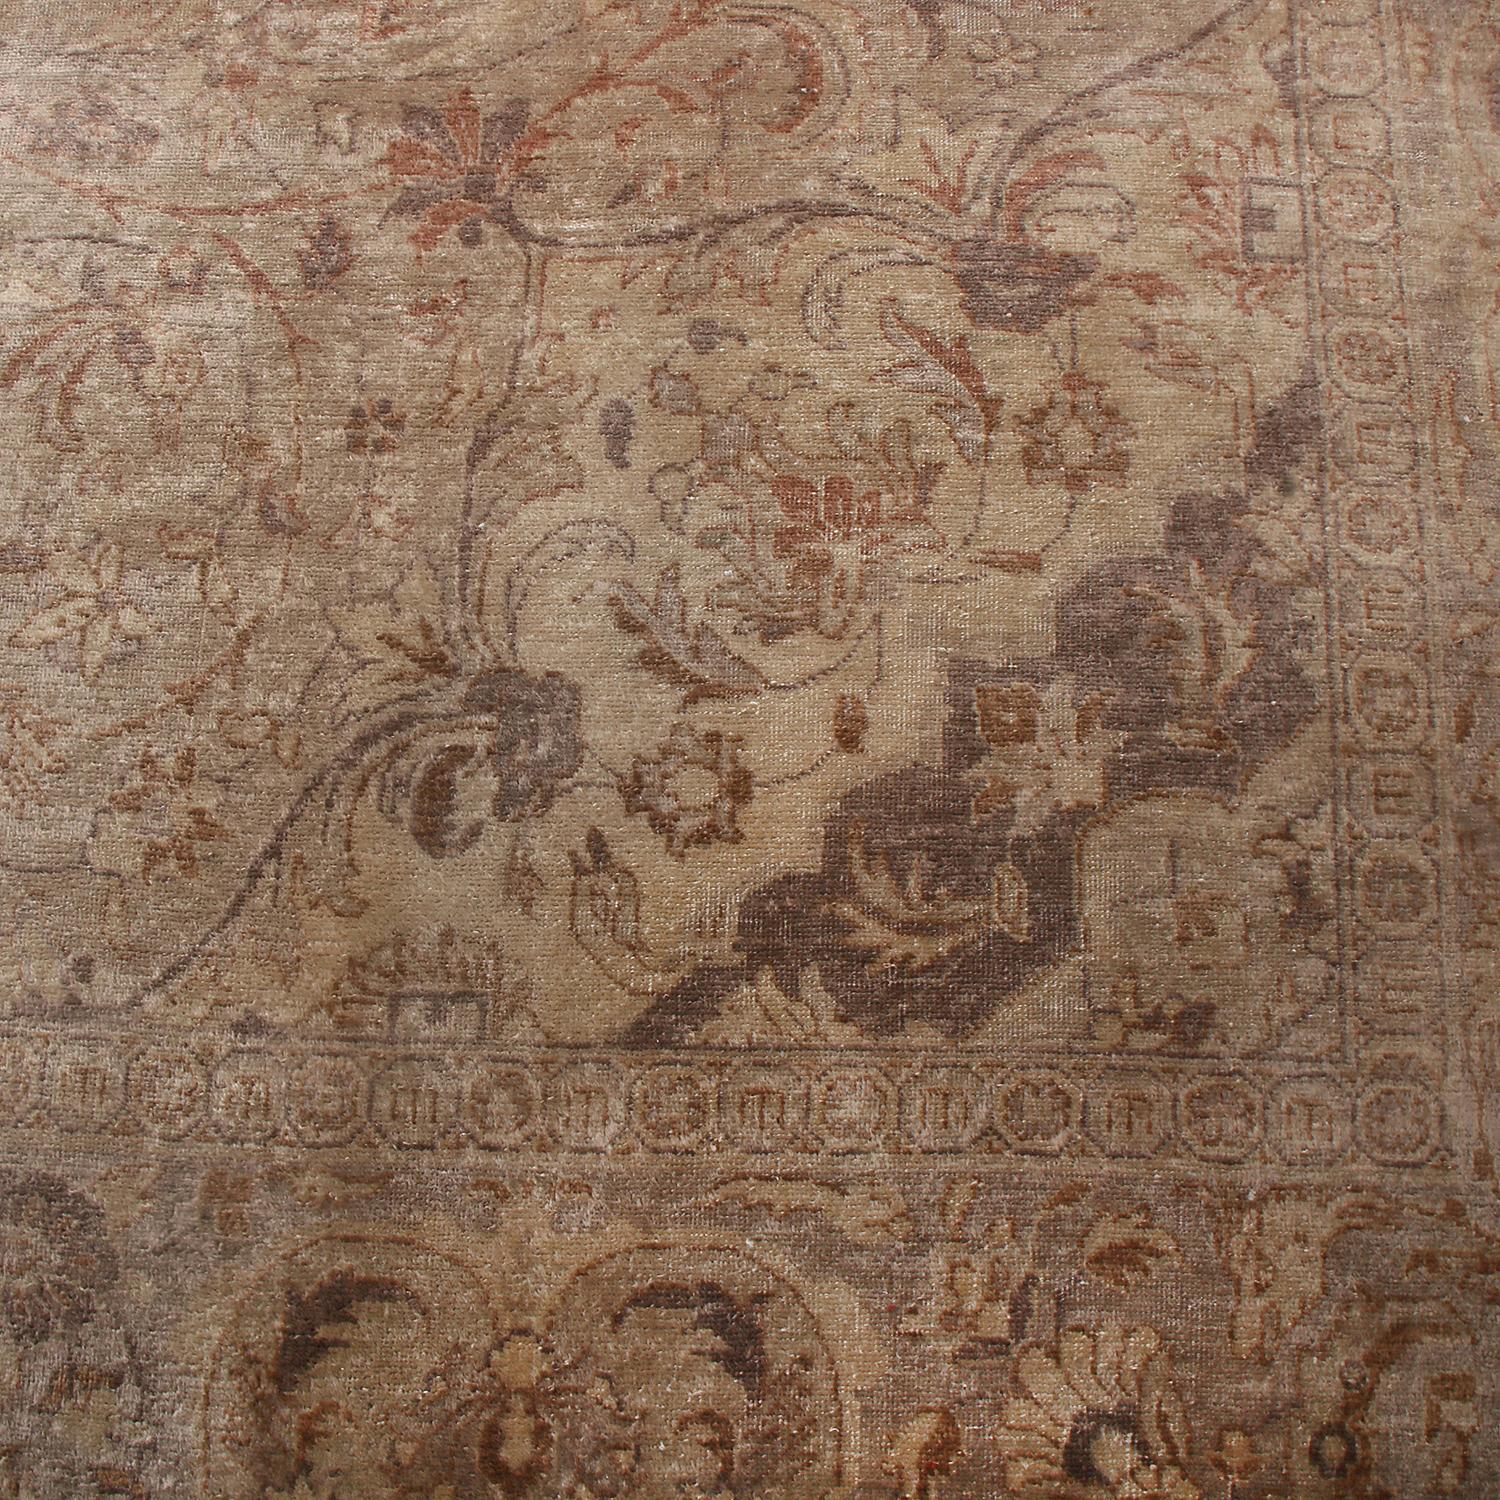 Antique Tabriz Floral Beige-Brown Wool Persian Rug by Rug & Kilim In Good Condition For Sale In Long Island City, NY